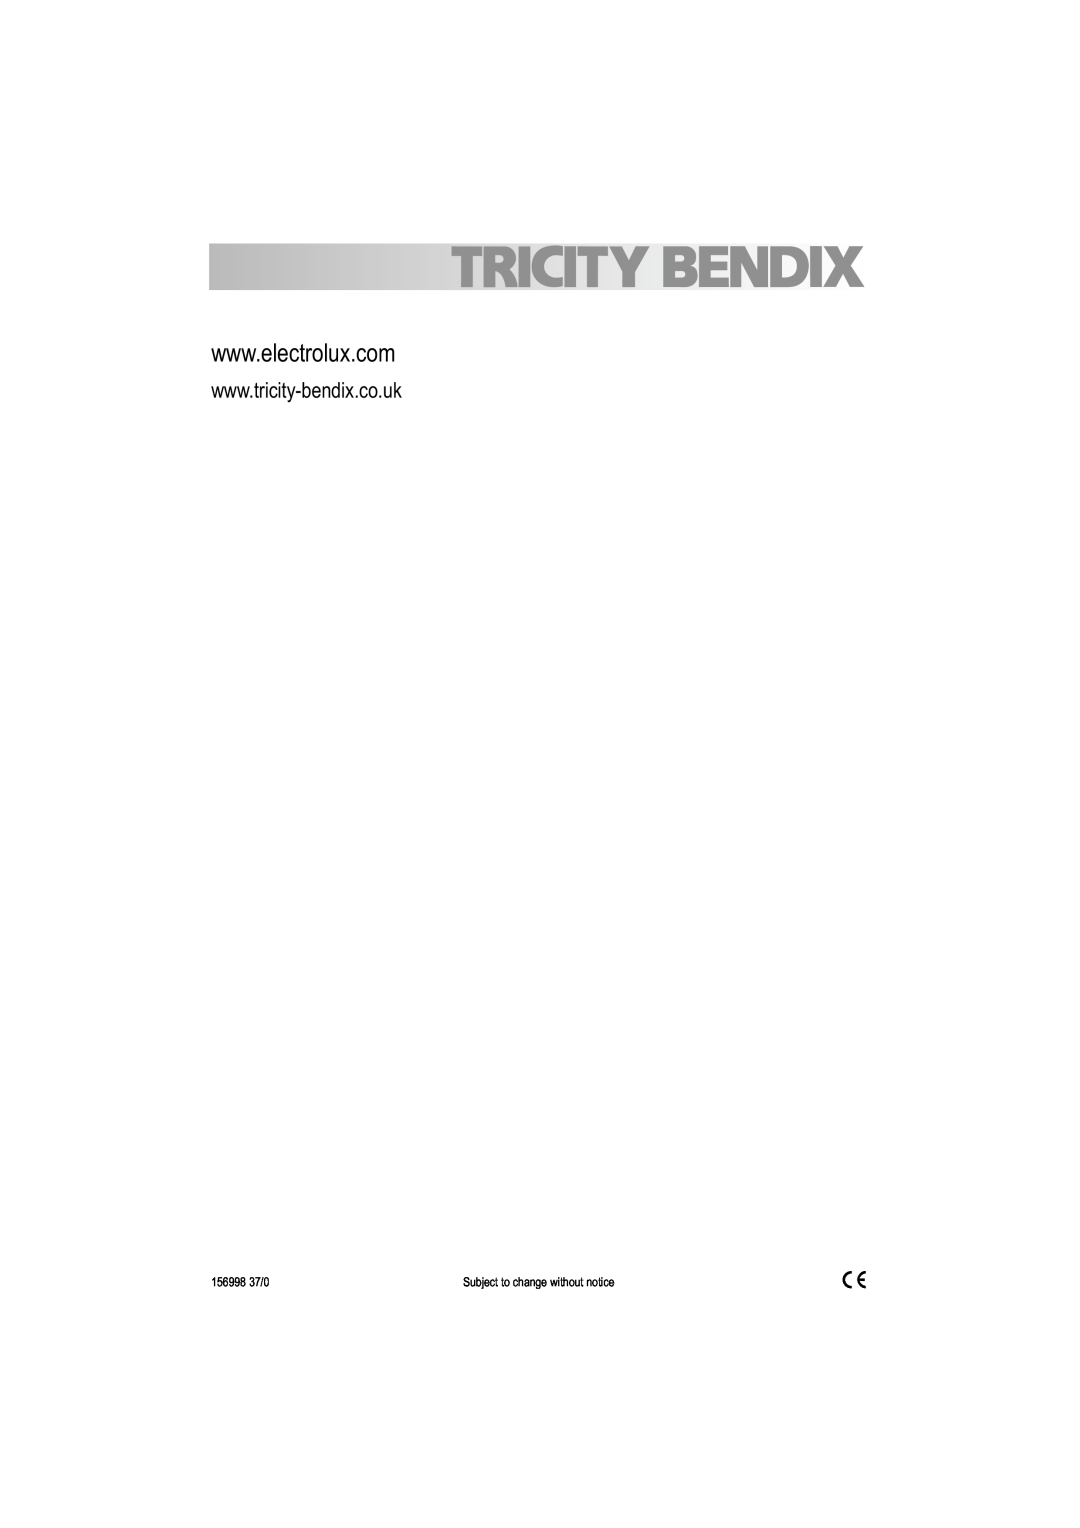 Tricity Bendix TDF 221 manual 156998 37/0, Subject to change without notice 